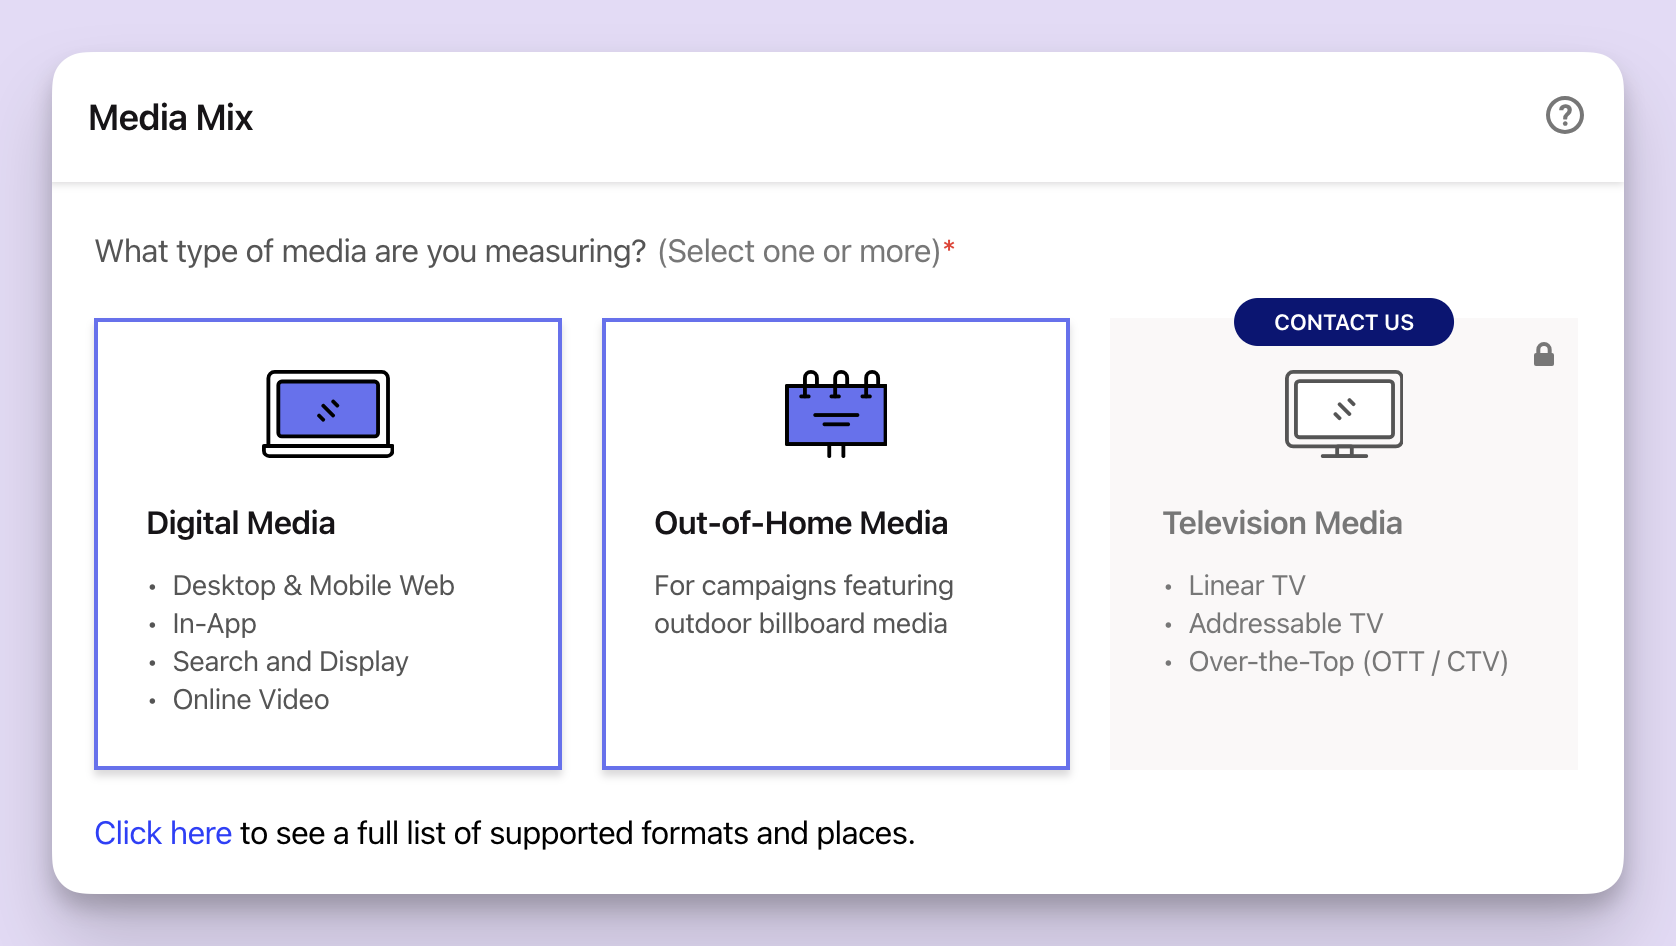 Users can select digital media, out-of-home media, or both.